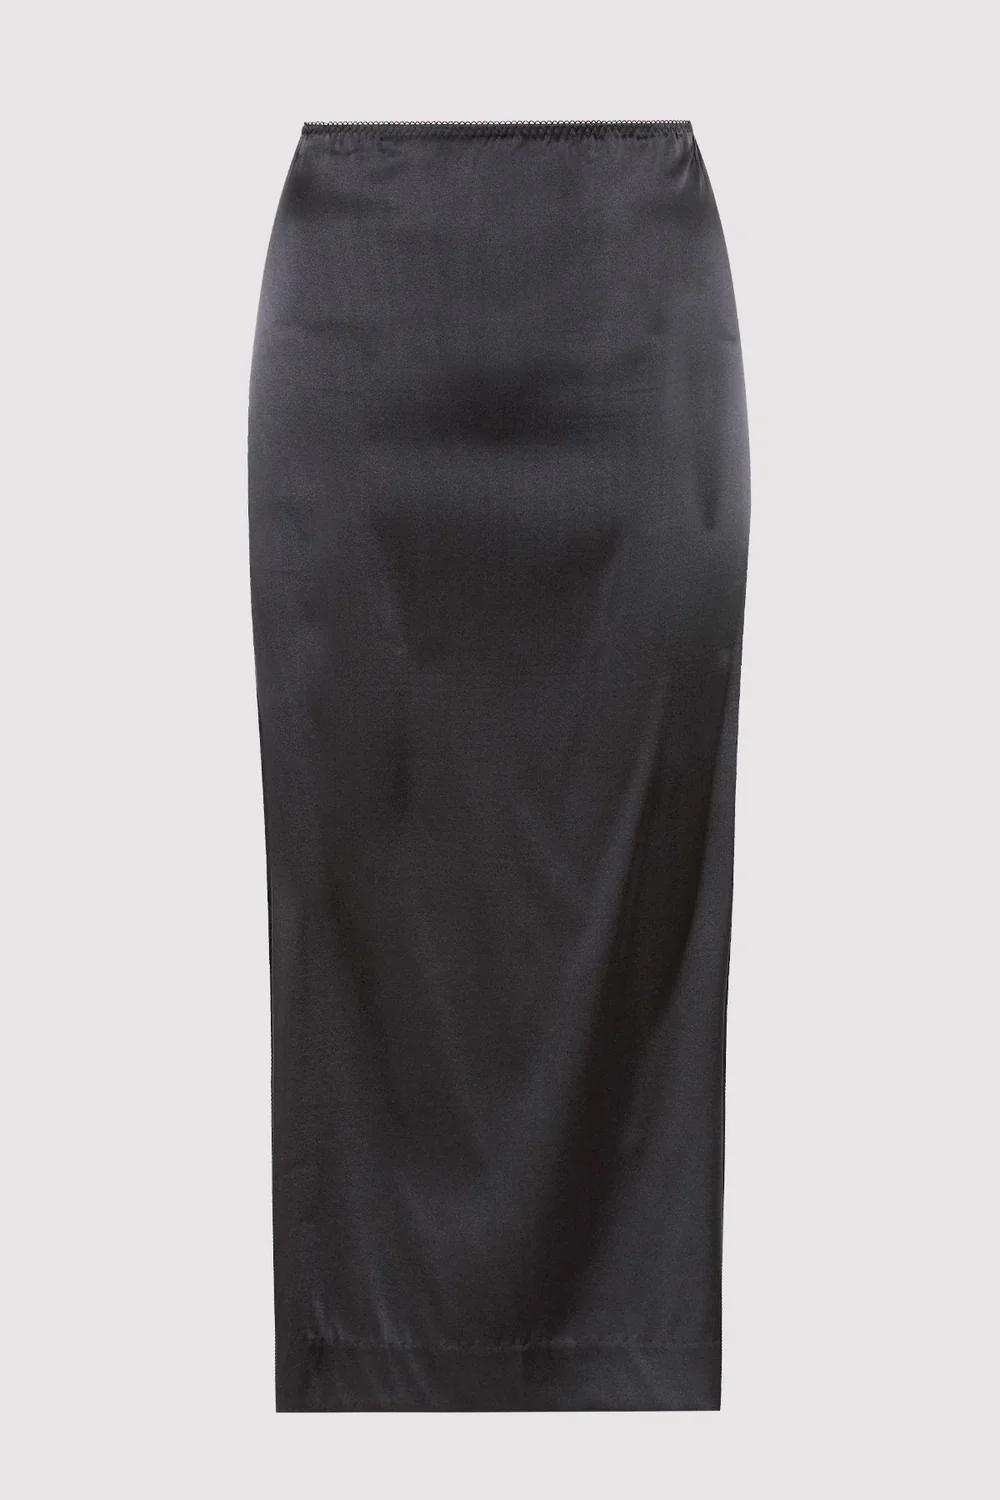 Product Image for Soft Silk Midi Skirt, Washed Black